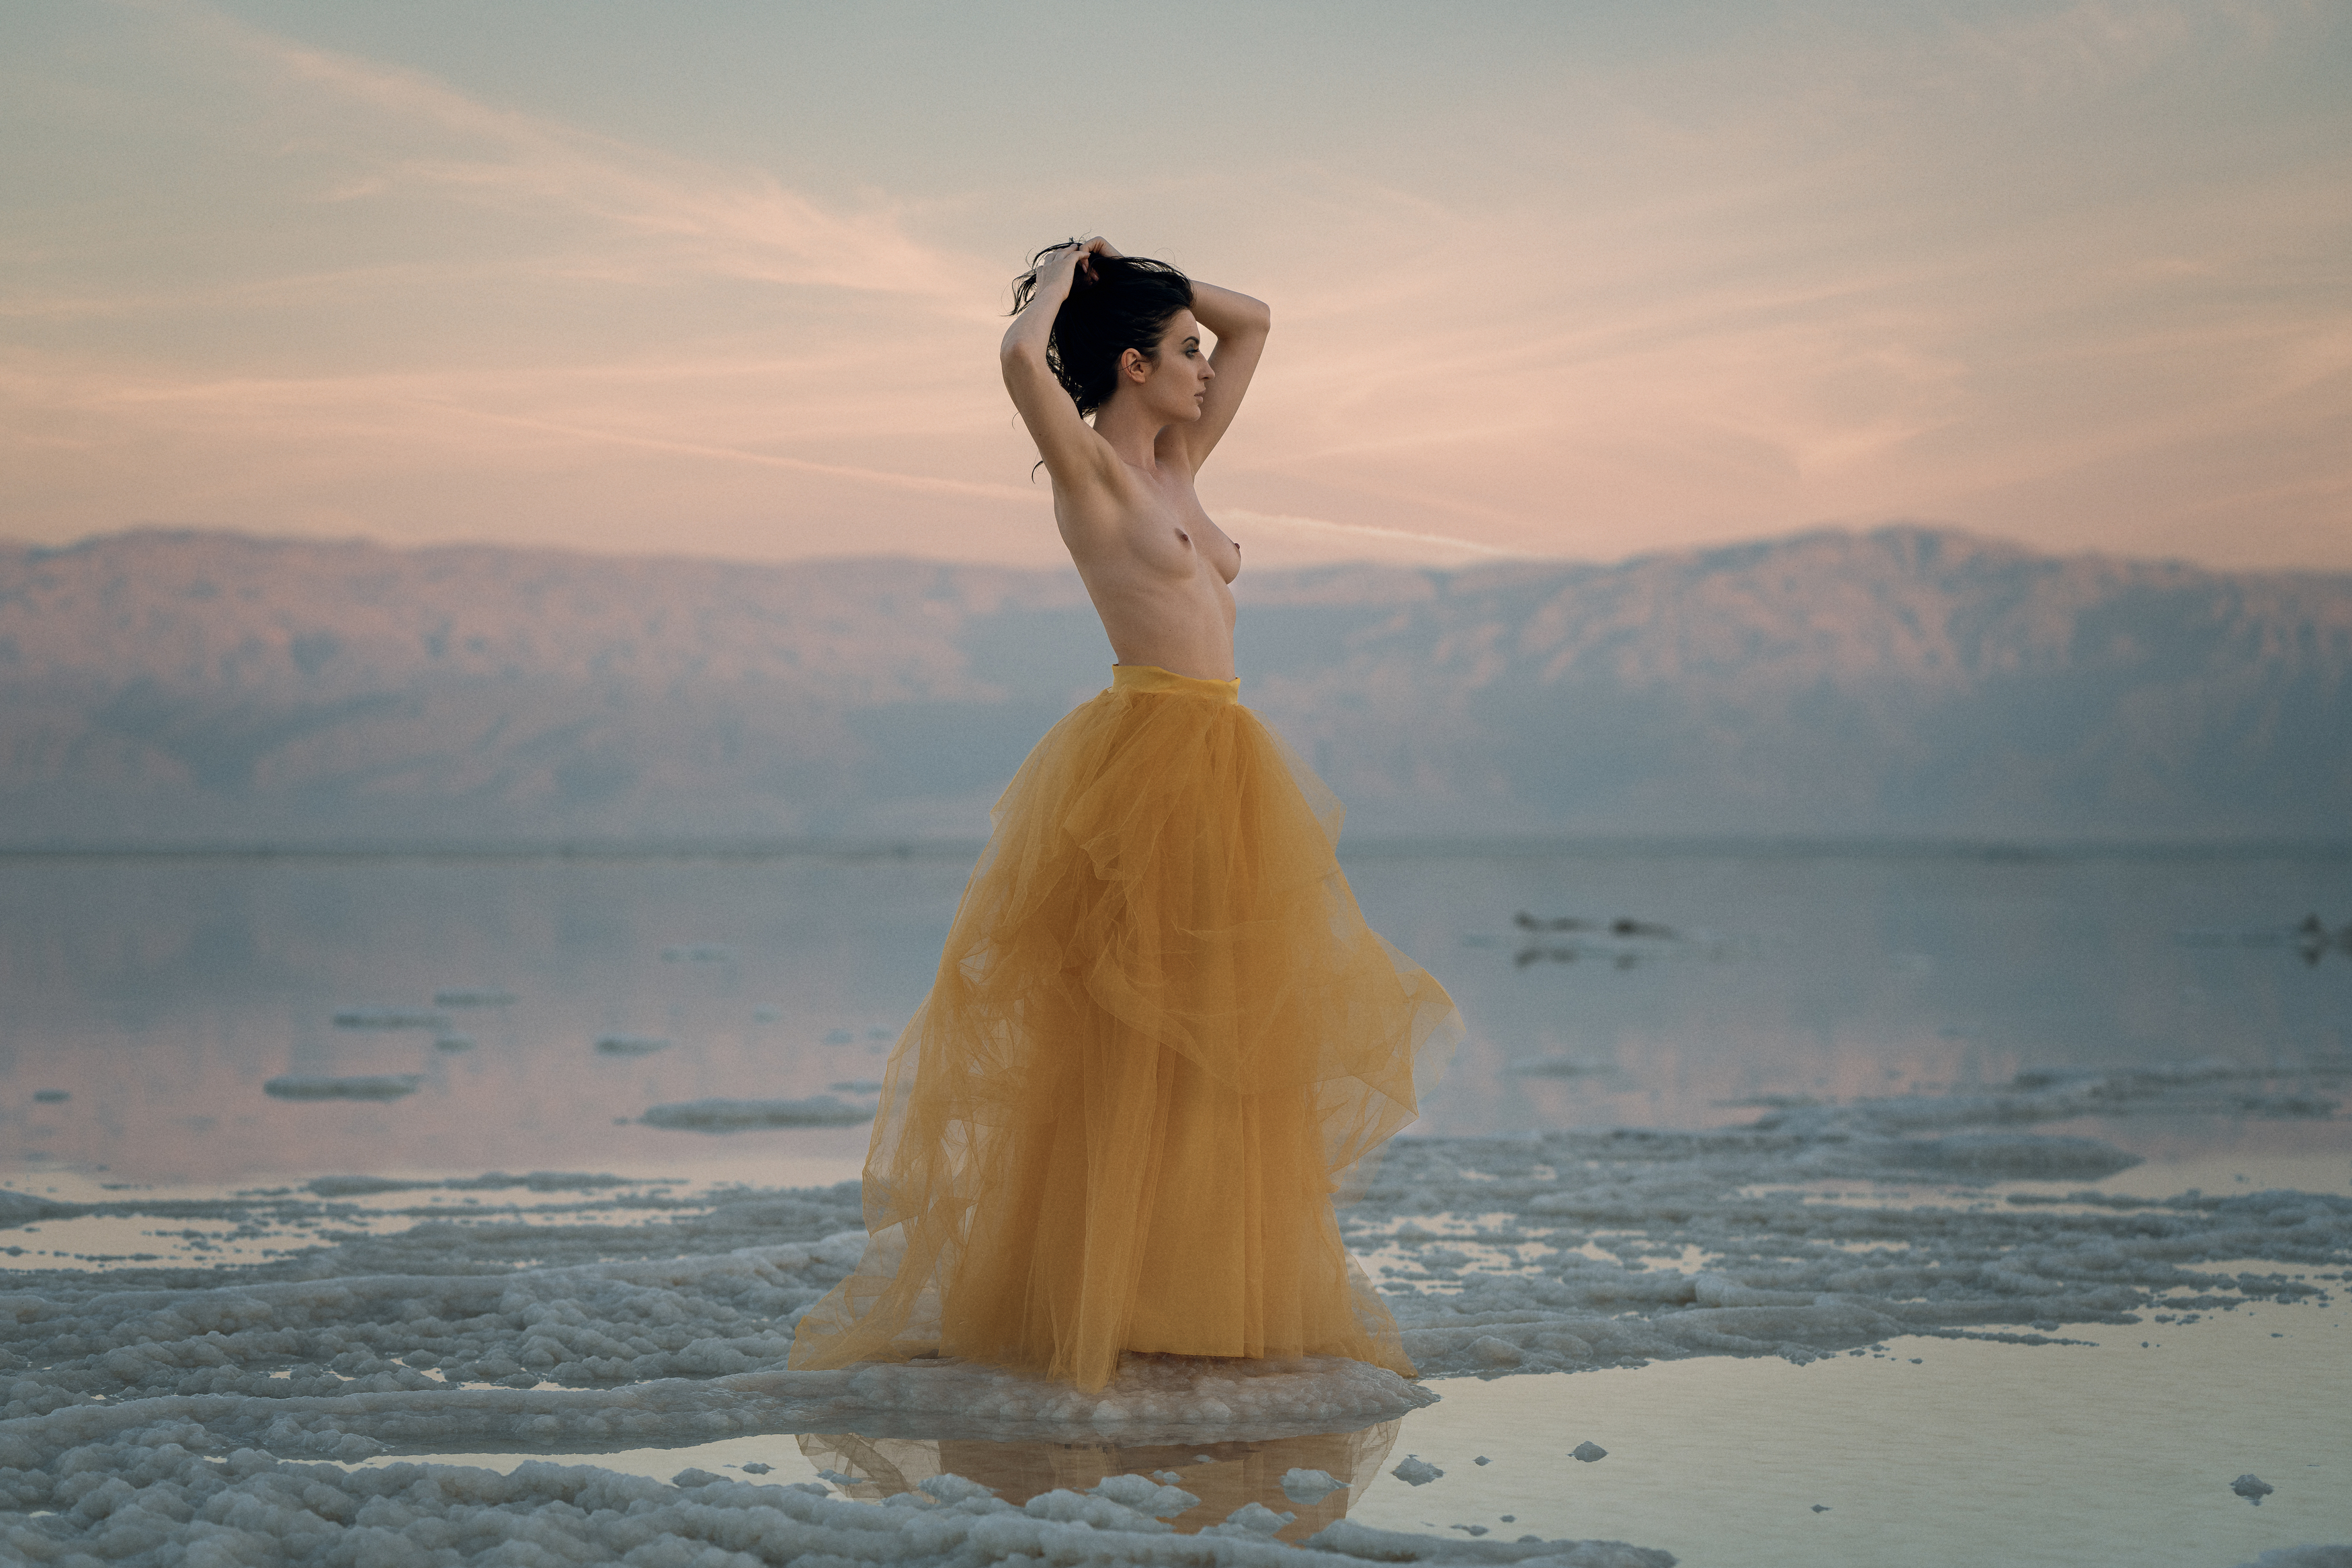 ball gown, beautiful woman, beauty, dead sea, desert, dreaminess, elegance, femininity, golden hour, grace, looking, mountains, nude, one person, outdoors, reflections, salt, seductive women, sensuality, side view, sky, standing, sunset, water, woman, Alex Tsarfin